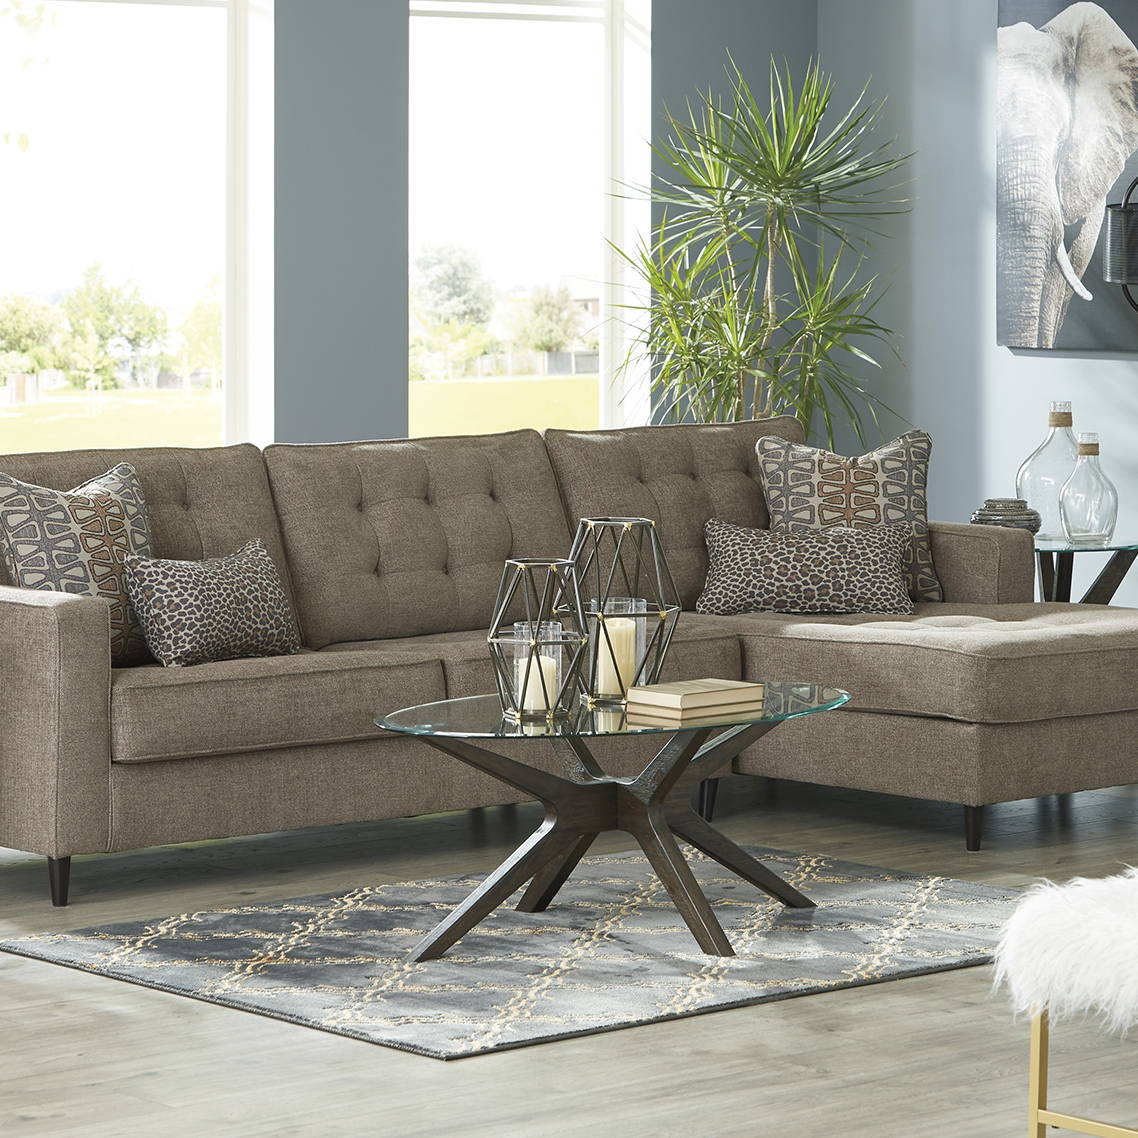 Ashley Brown Sectional, Cushions and a Coffee Table. Shop Sectionals Now